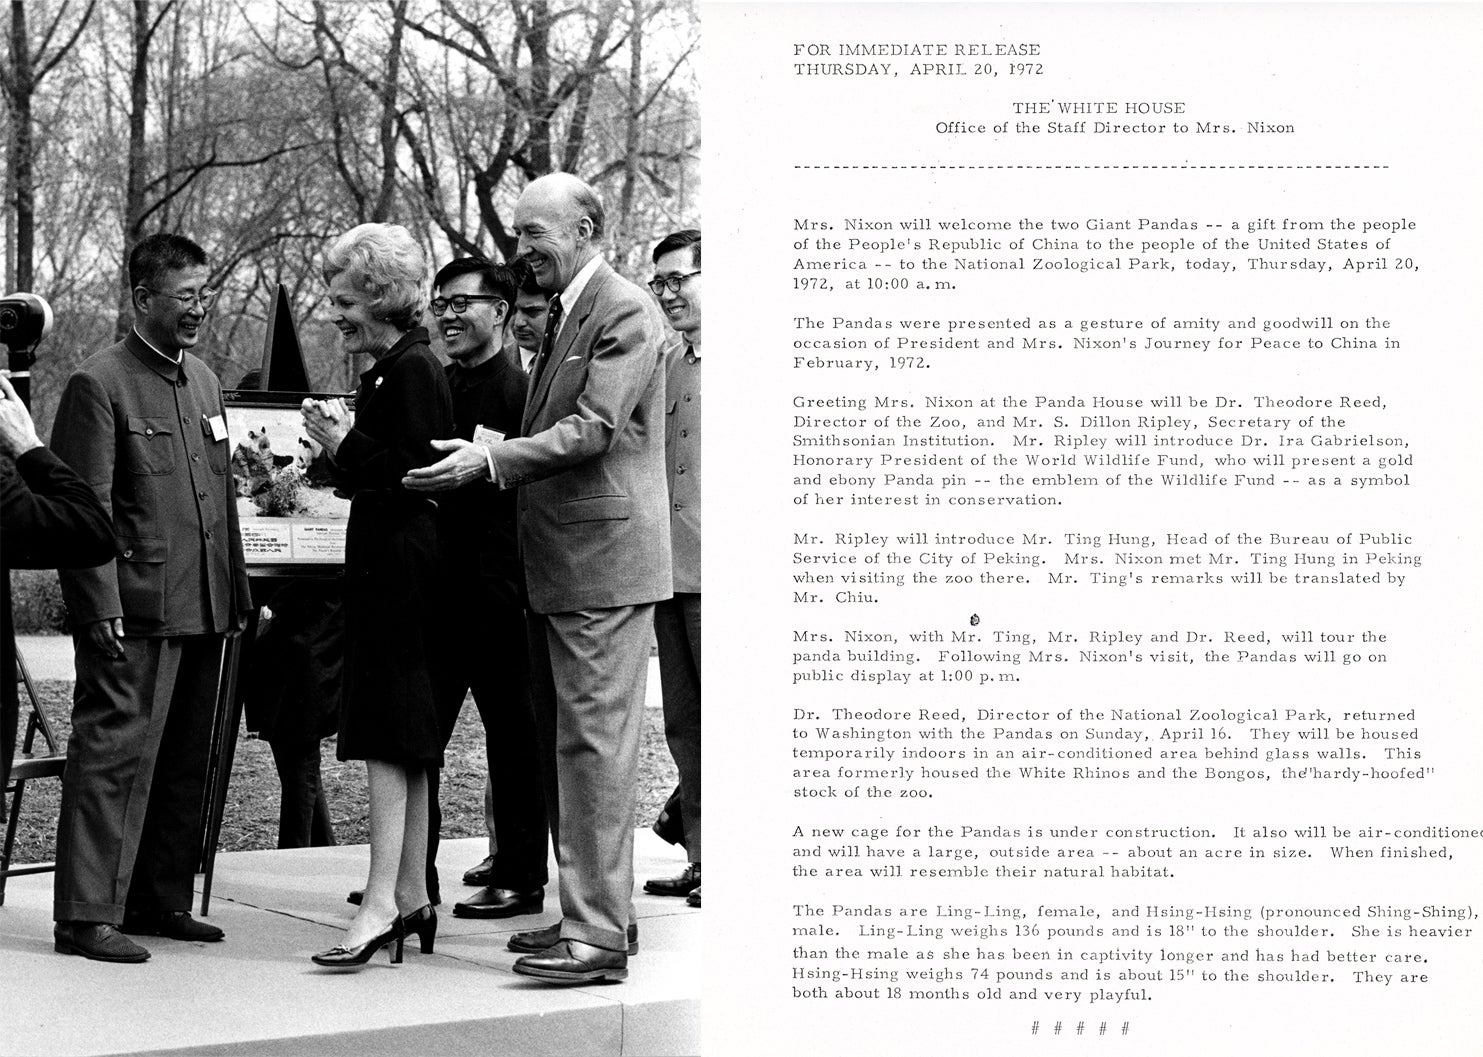 Left: First Lady Patricia Nixon at the Zoo on April 20, 1972, for the official welcome ceremony for giant pandas Ling Ling and Hsing Hsing; right: White House press release on the arrival of Ling-Ling and Hsing-Hsing at the Zoo dated April 20, 1972